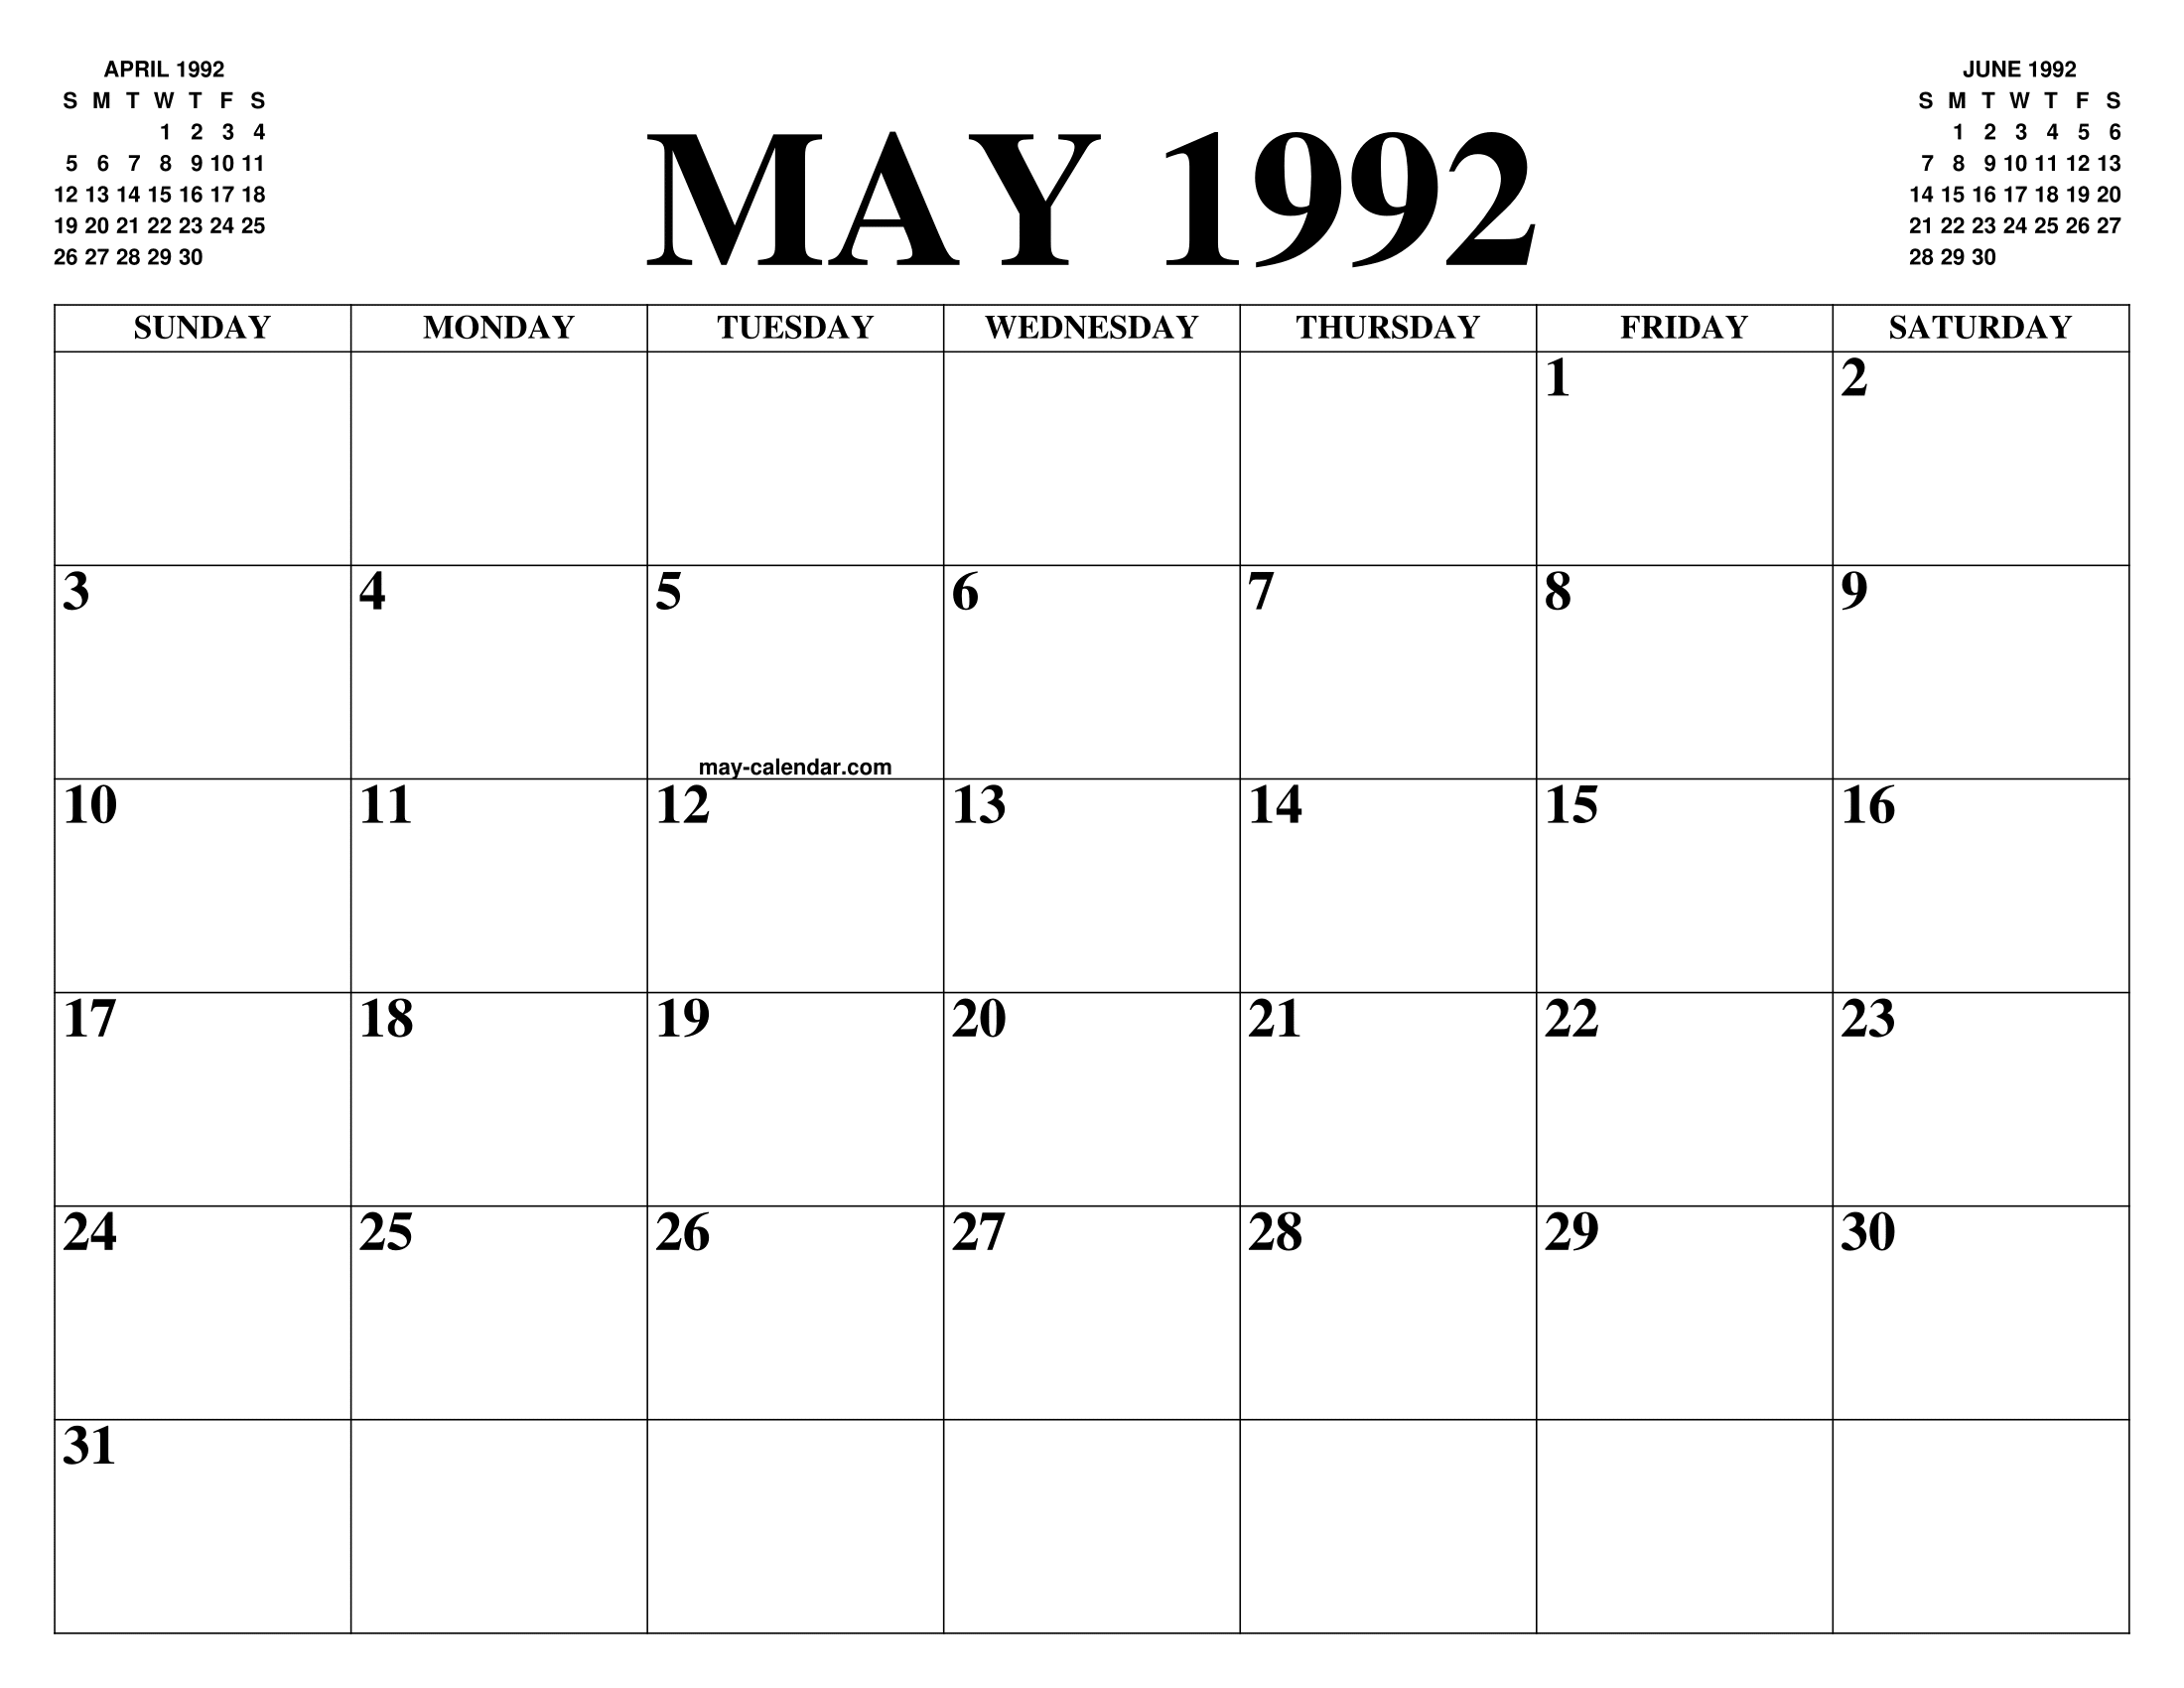 MAY 1992 CALENDAR OF THE MONTH: FREE PRINTABLE MAY CALENDAR OF THE YEAR